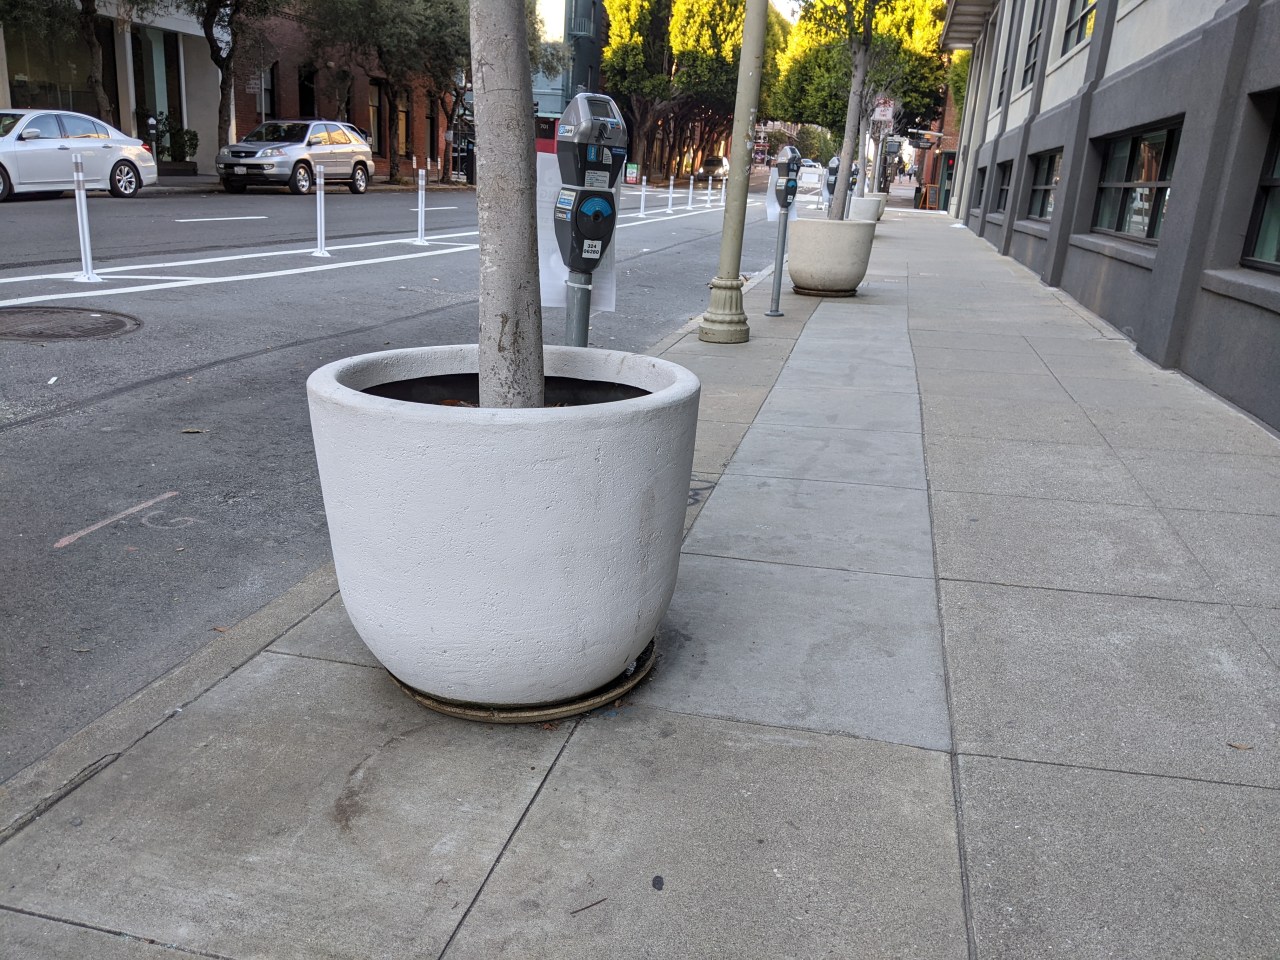 Why would SFMTA put protective planters on the wrong side of the bike lane?